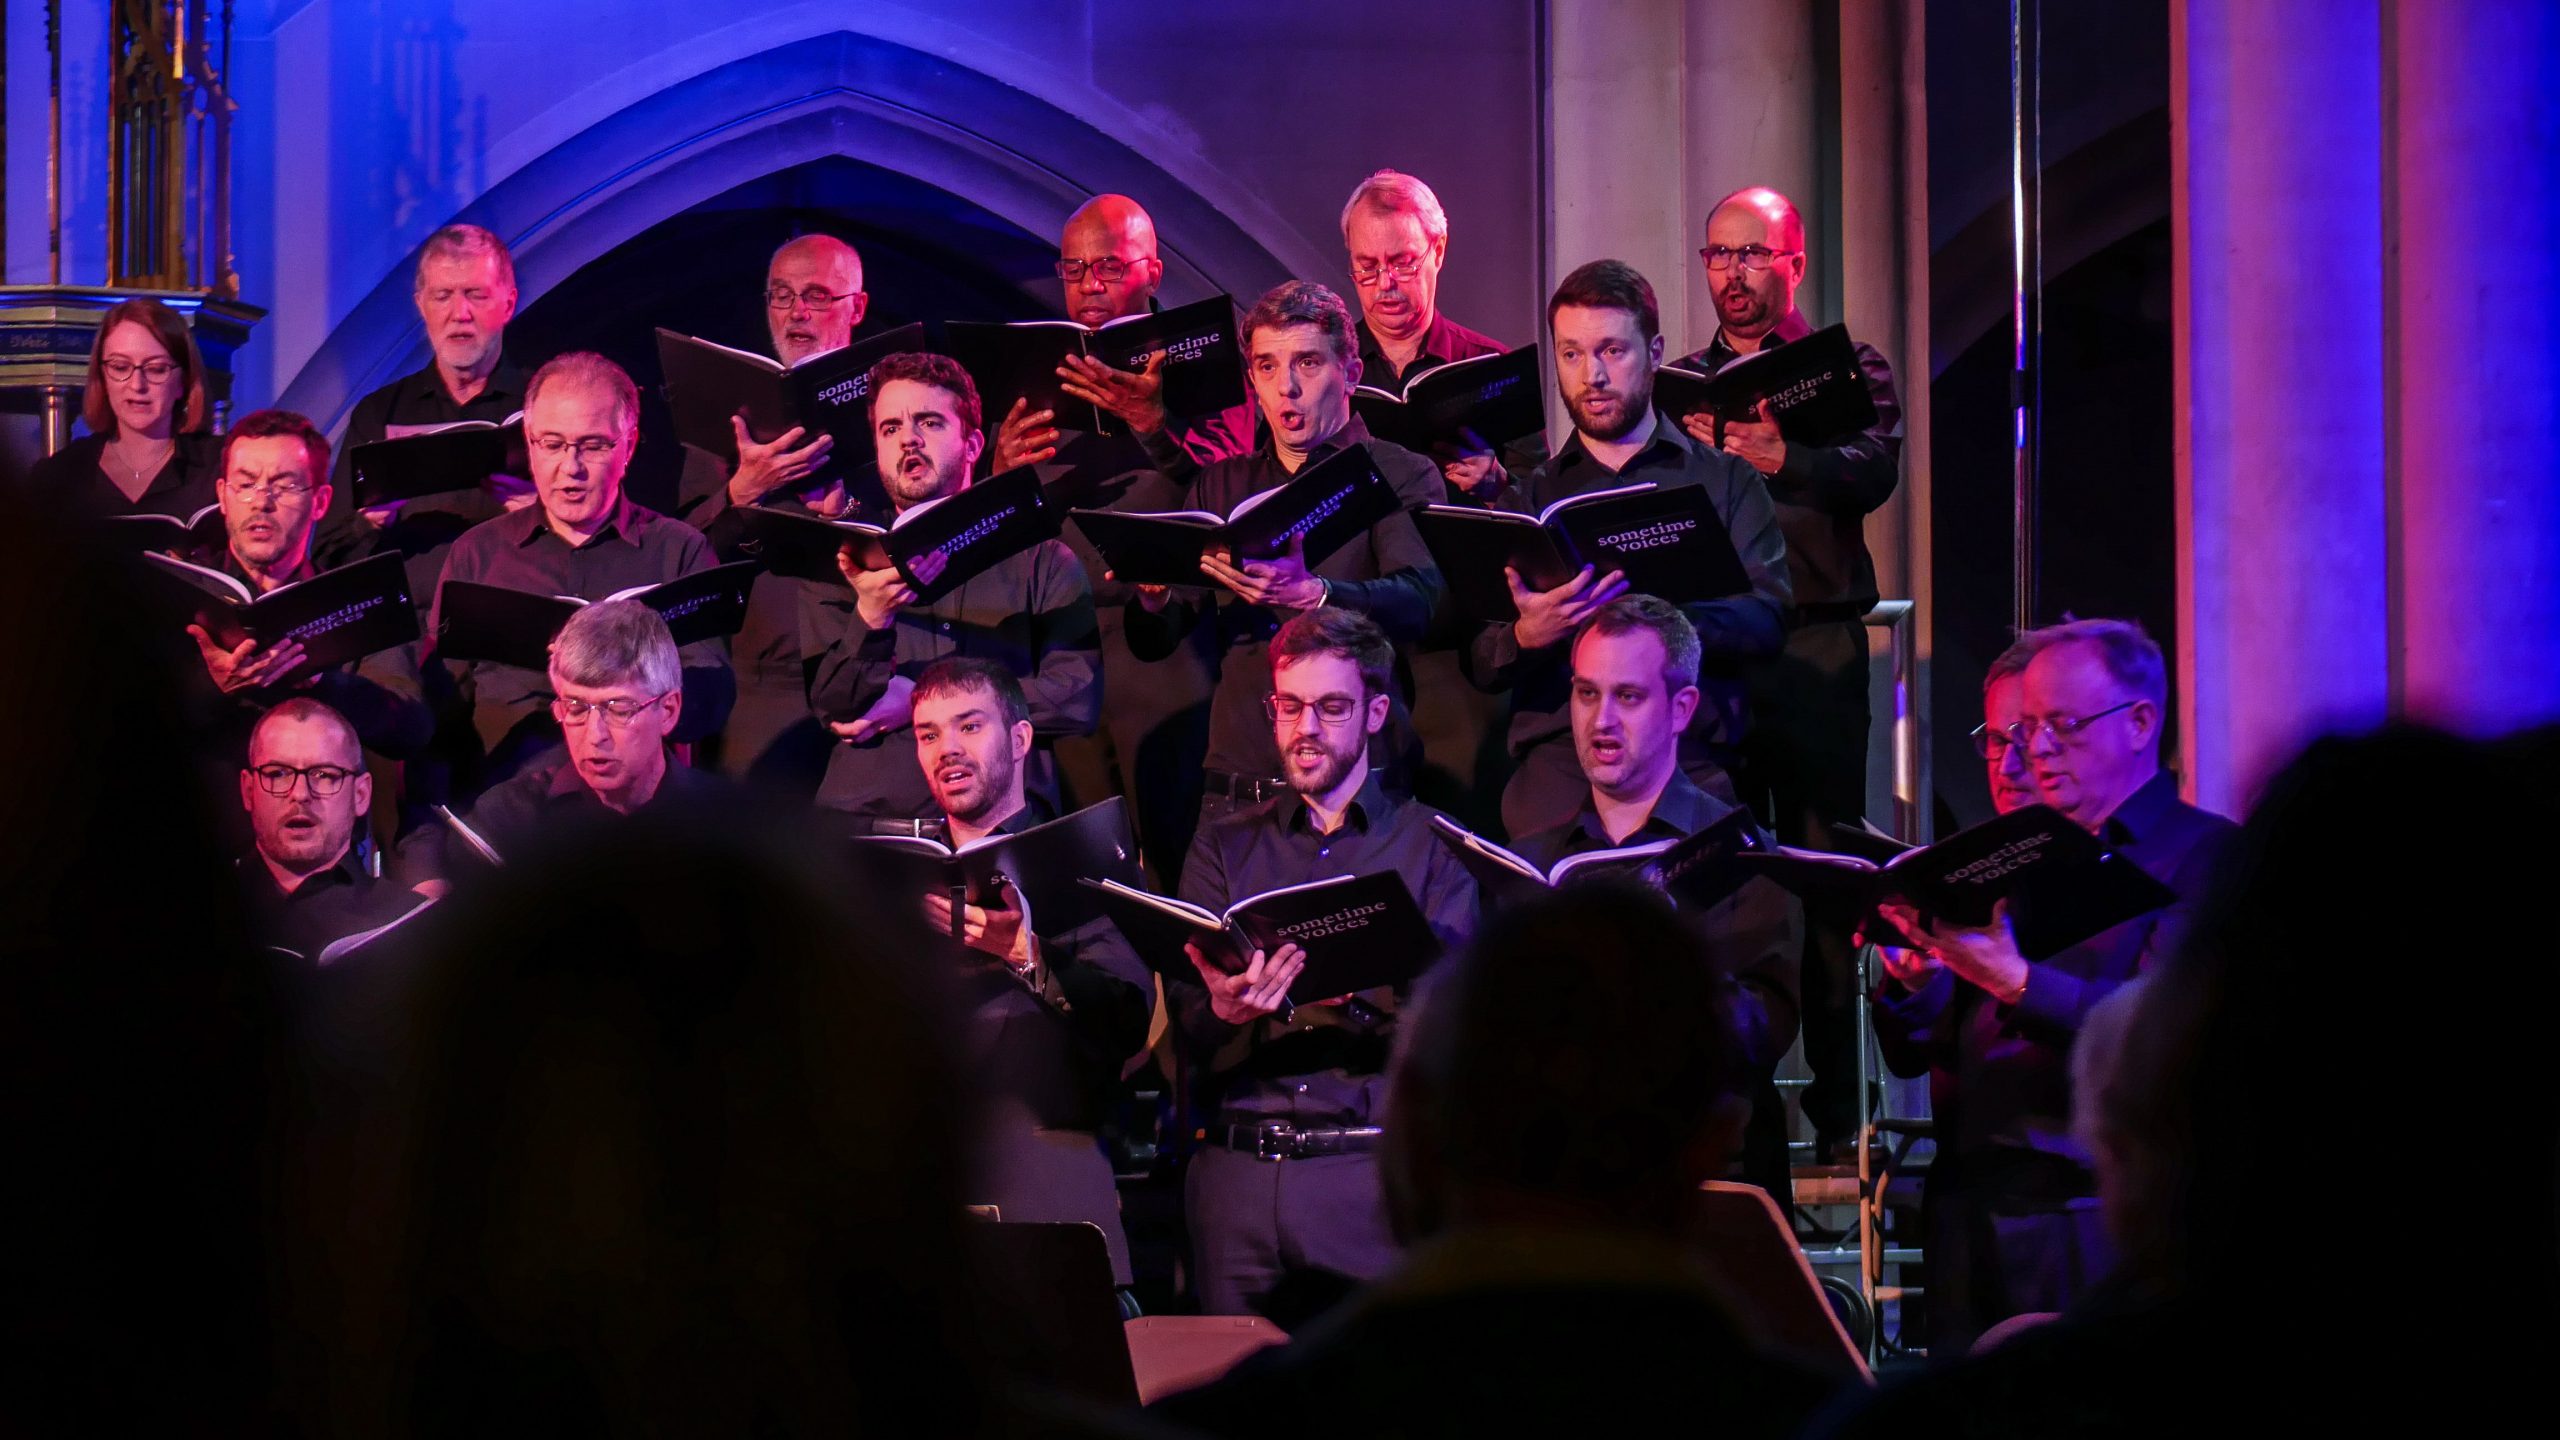 Visual aid: Part of the male choir during a classic music concert